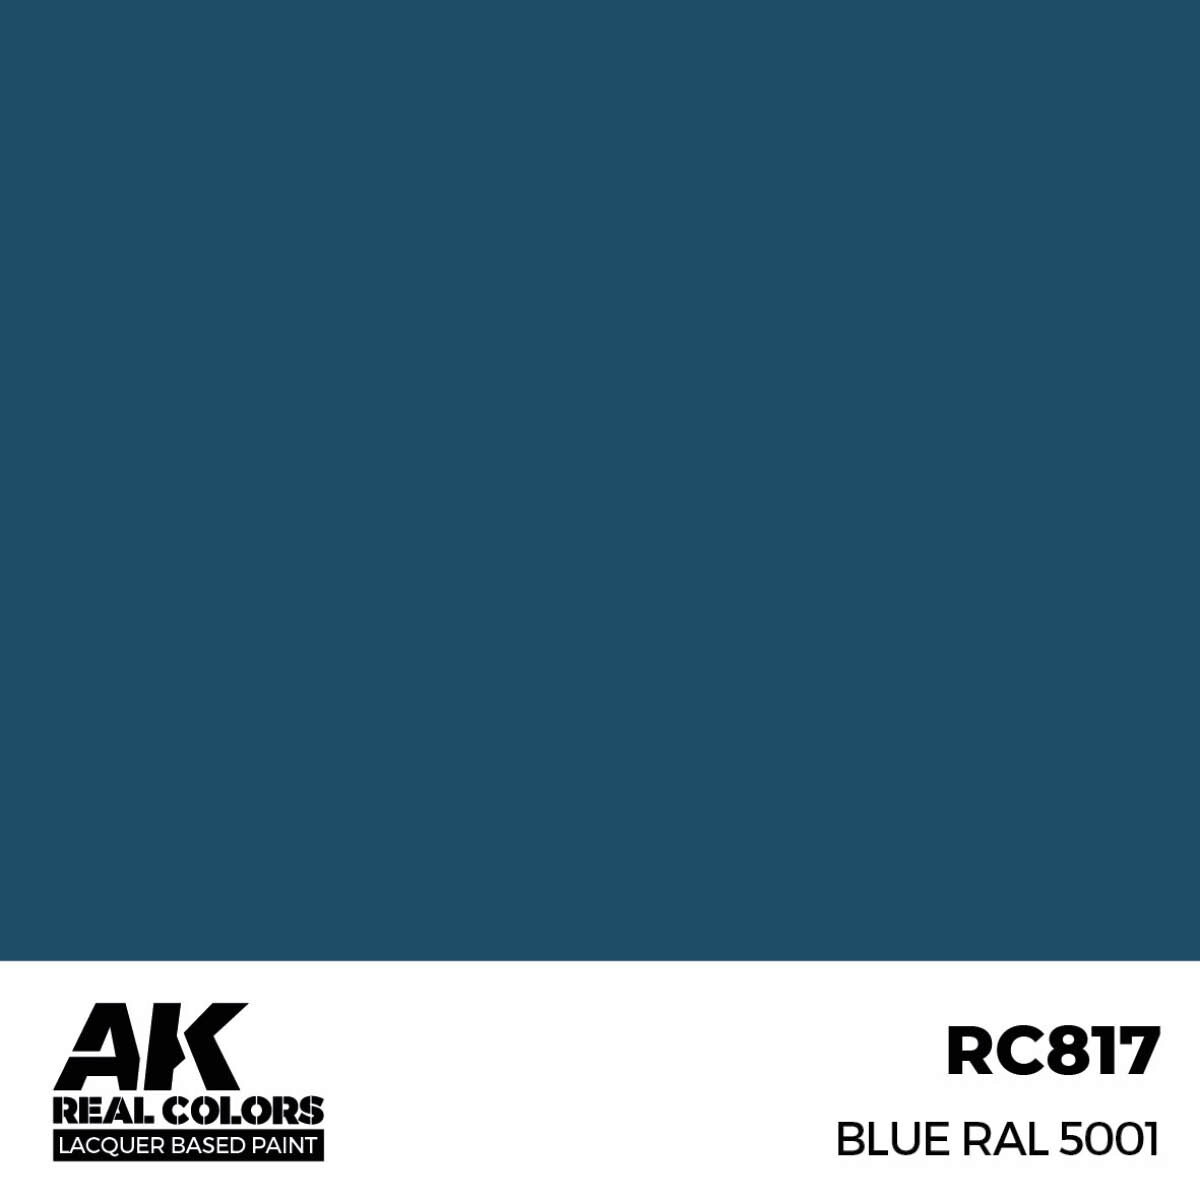 AK RC817 Real Colors Blue RAL 5001 17 ml.